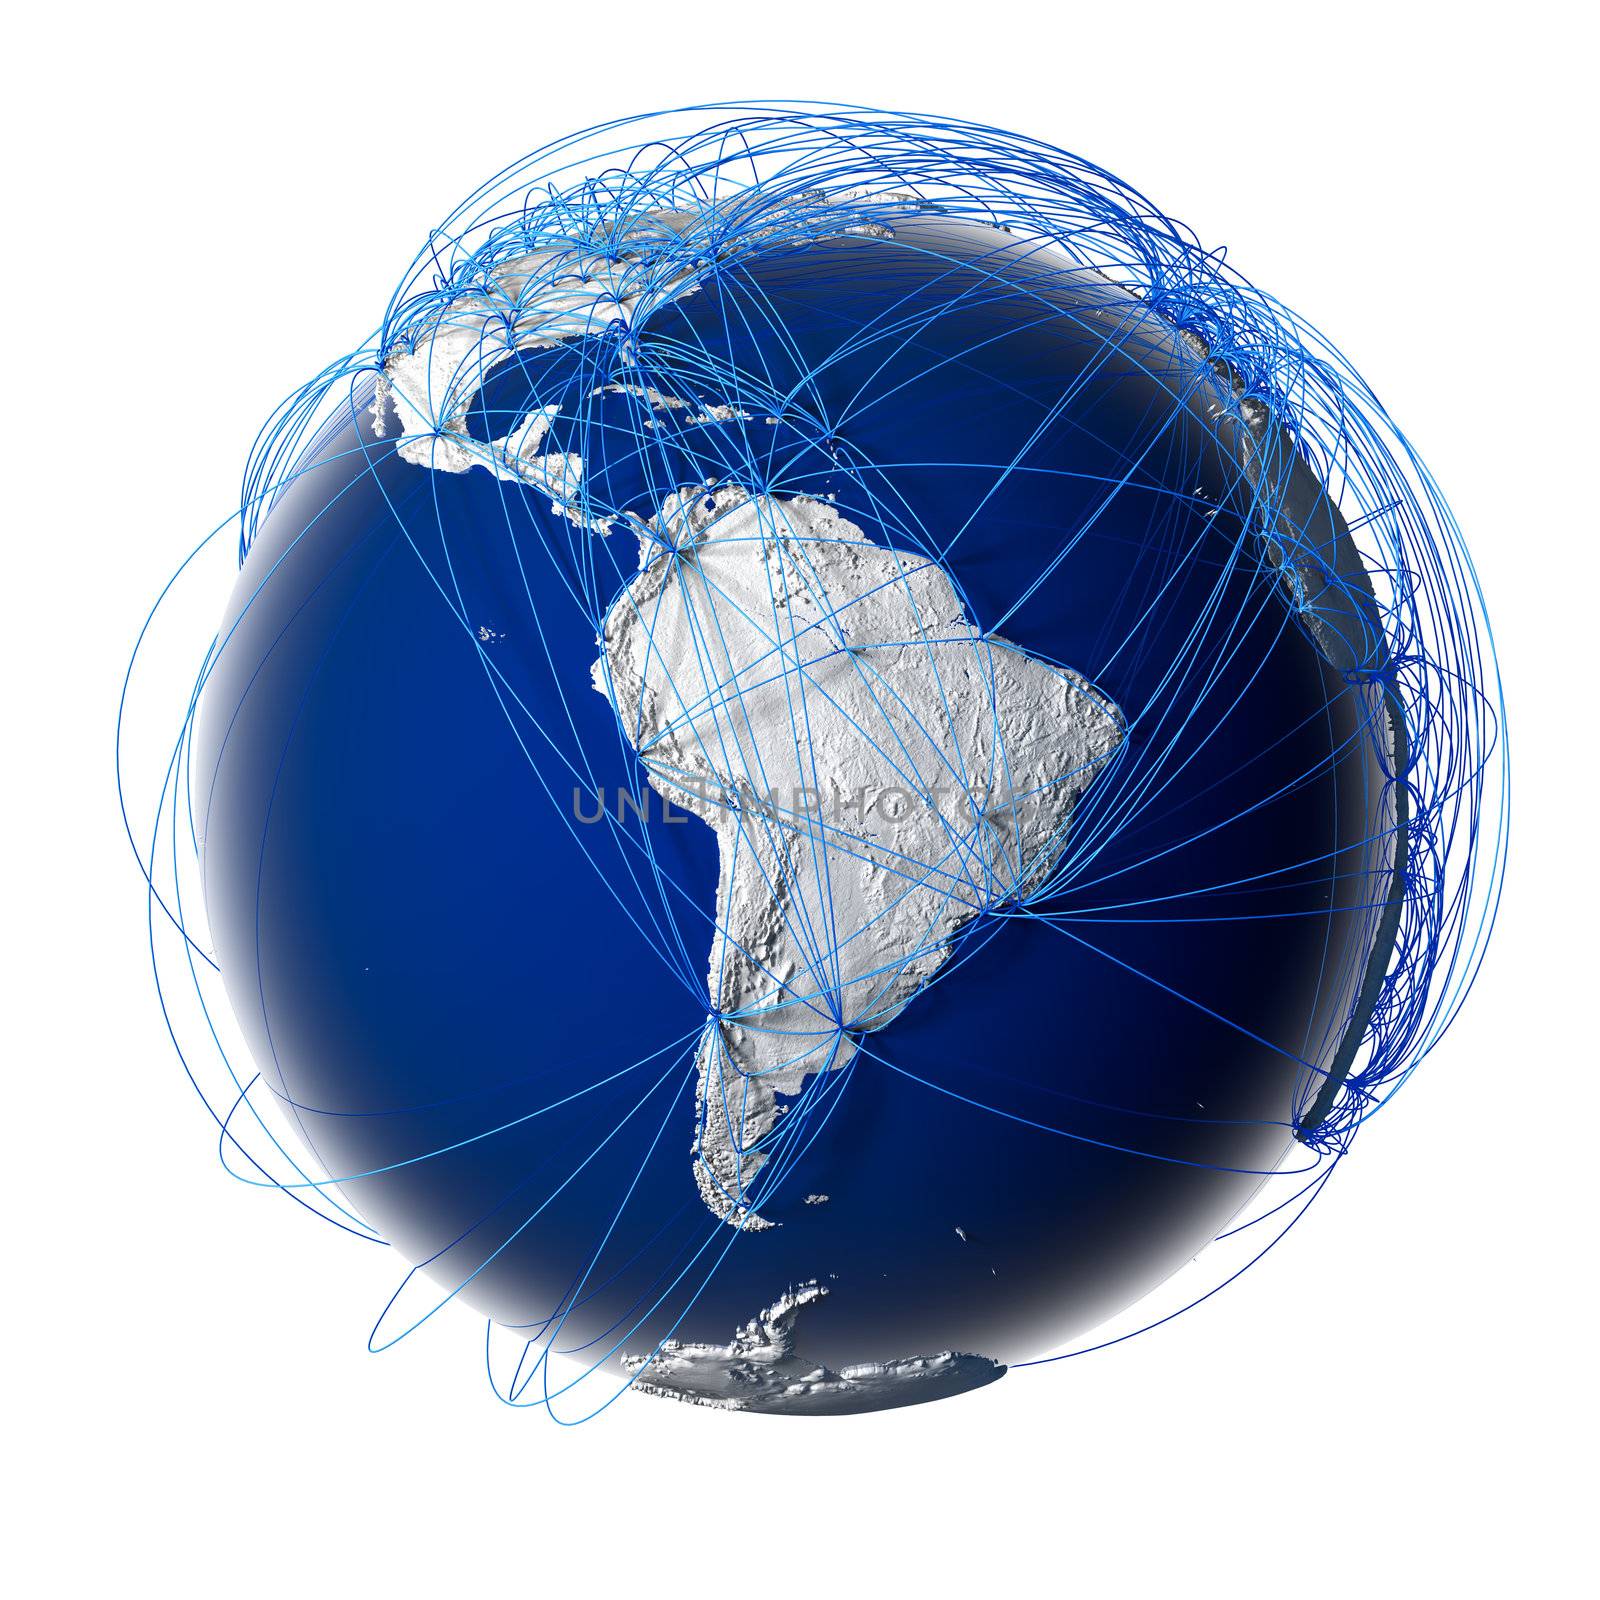 Major global aviation routes on the globe by Antartis